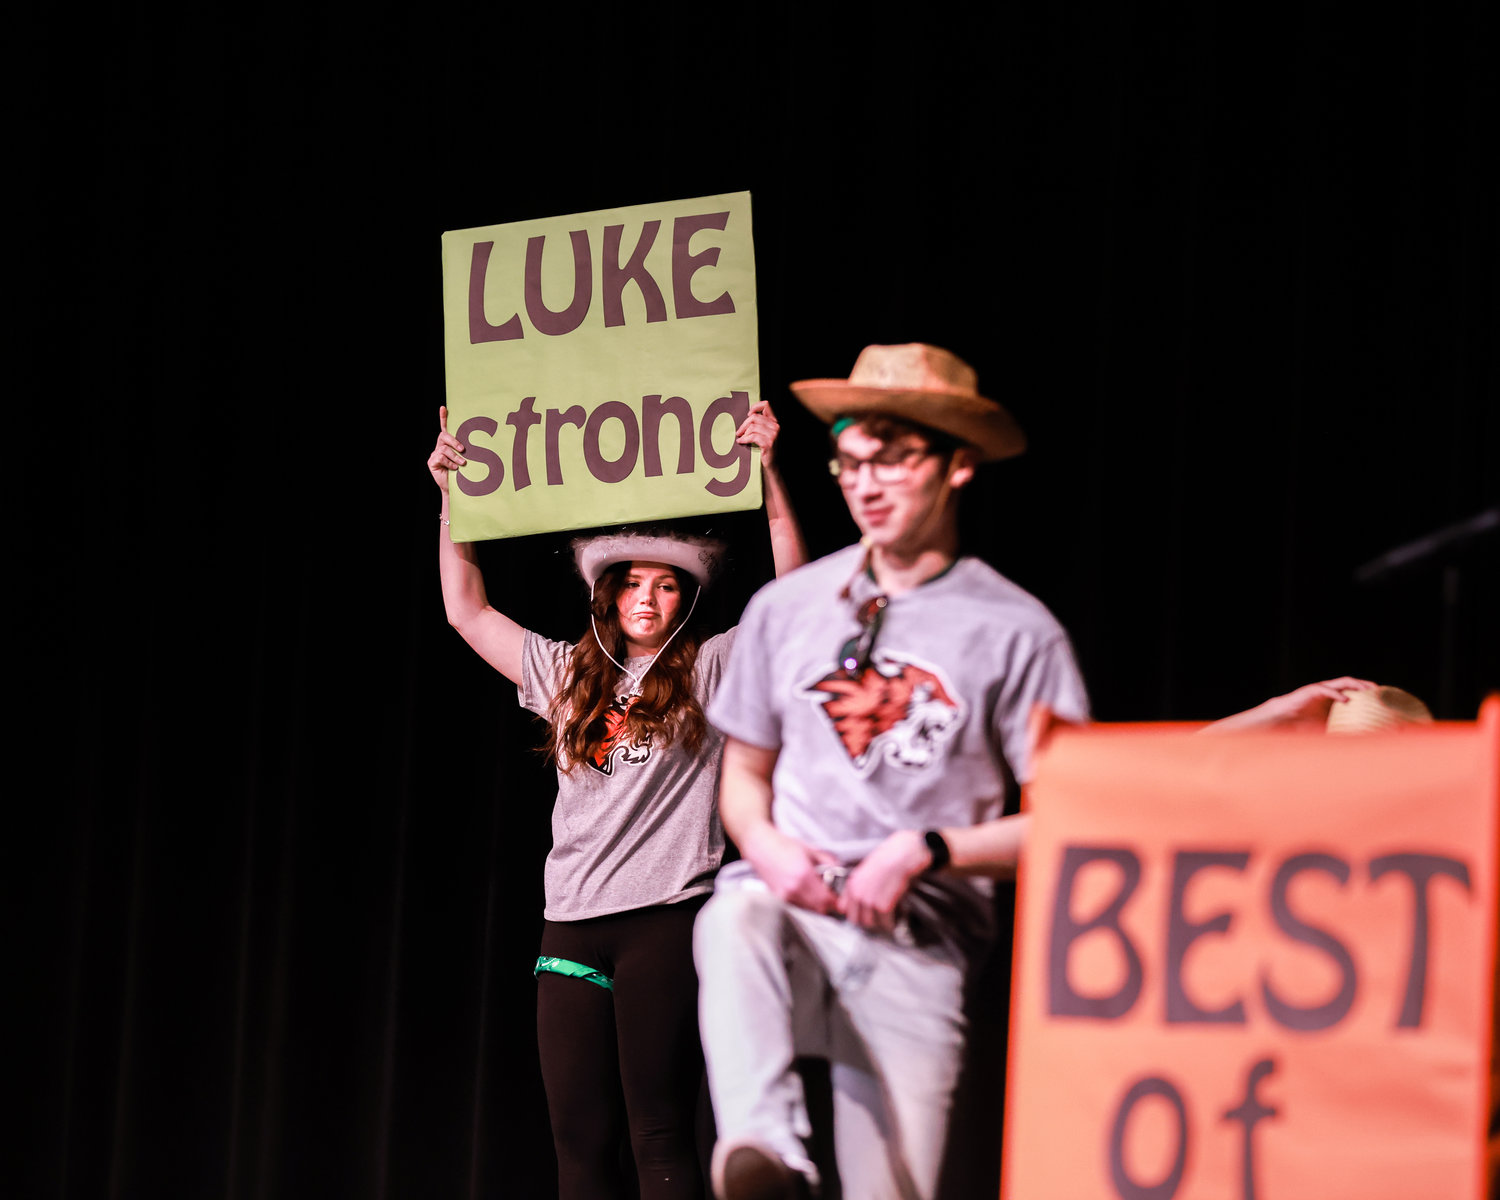 Morgan Nixon holds a "Luke Strong" sign during the opening dance of the Best of BG competition on Saturday, March 25 at Battle Ground High School.  The event raised money for Luke Montei, a teen who received a heart transplant the following day.